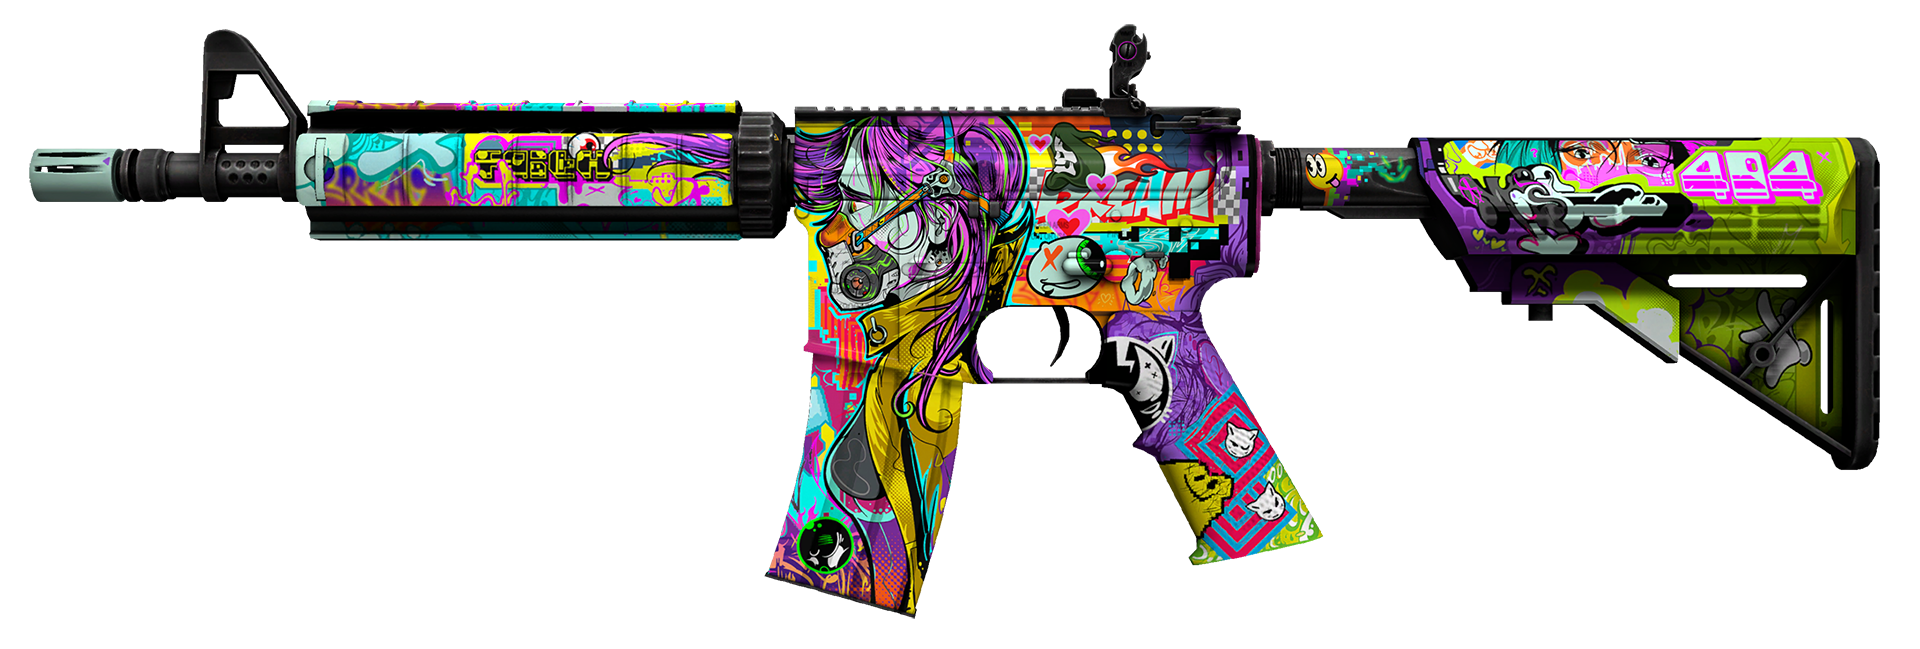 M4A4 In Living Color Large Rendering